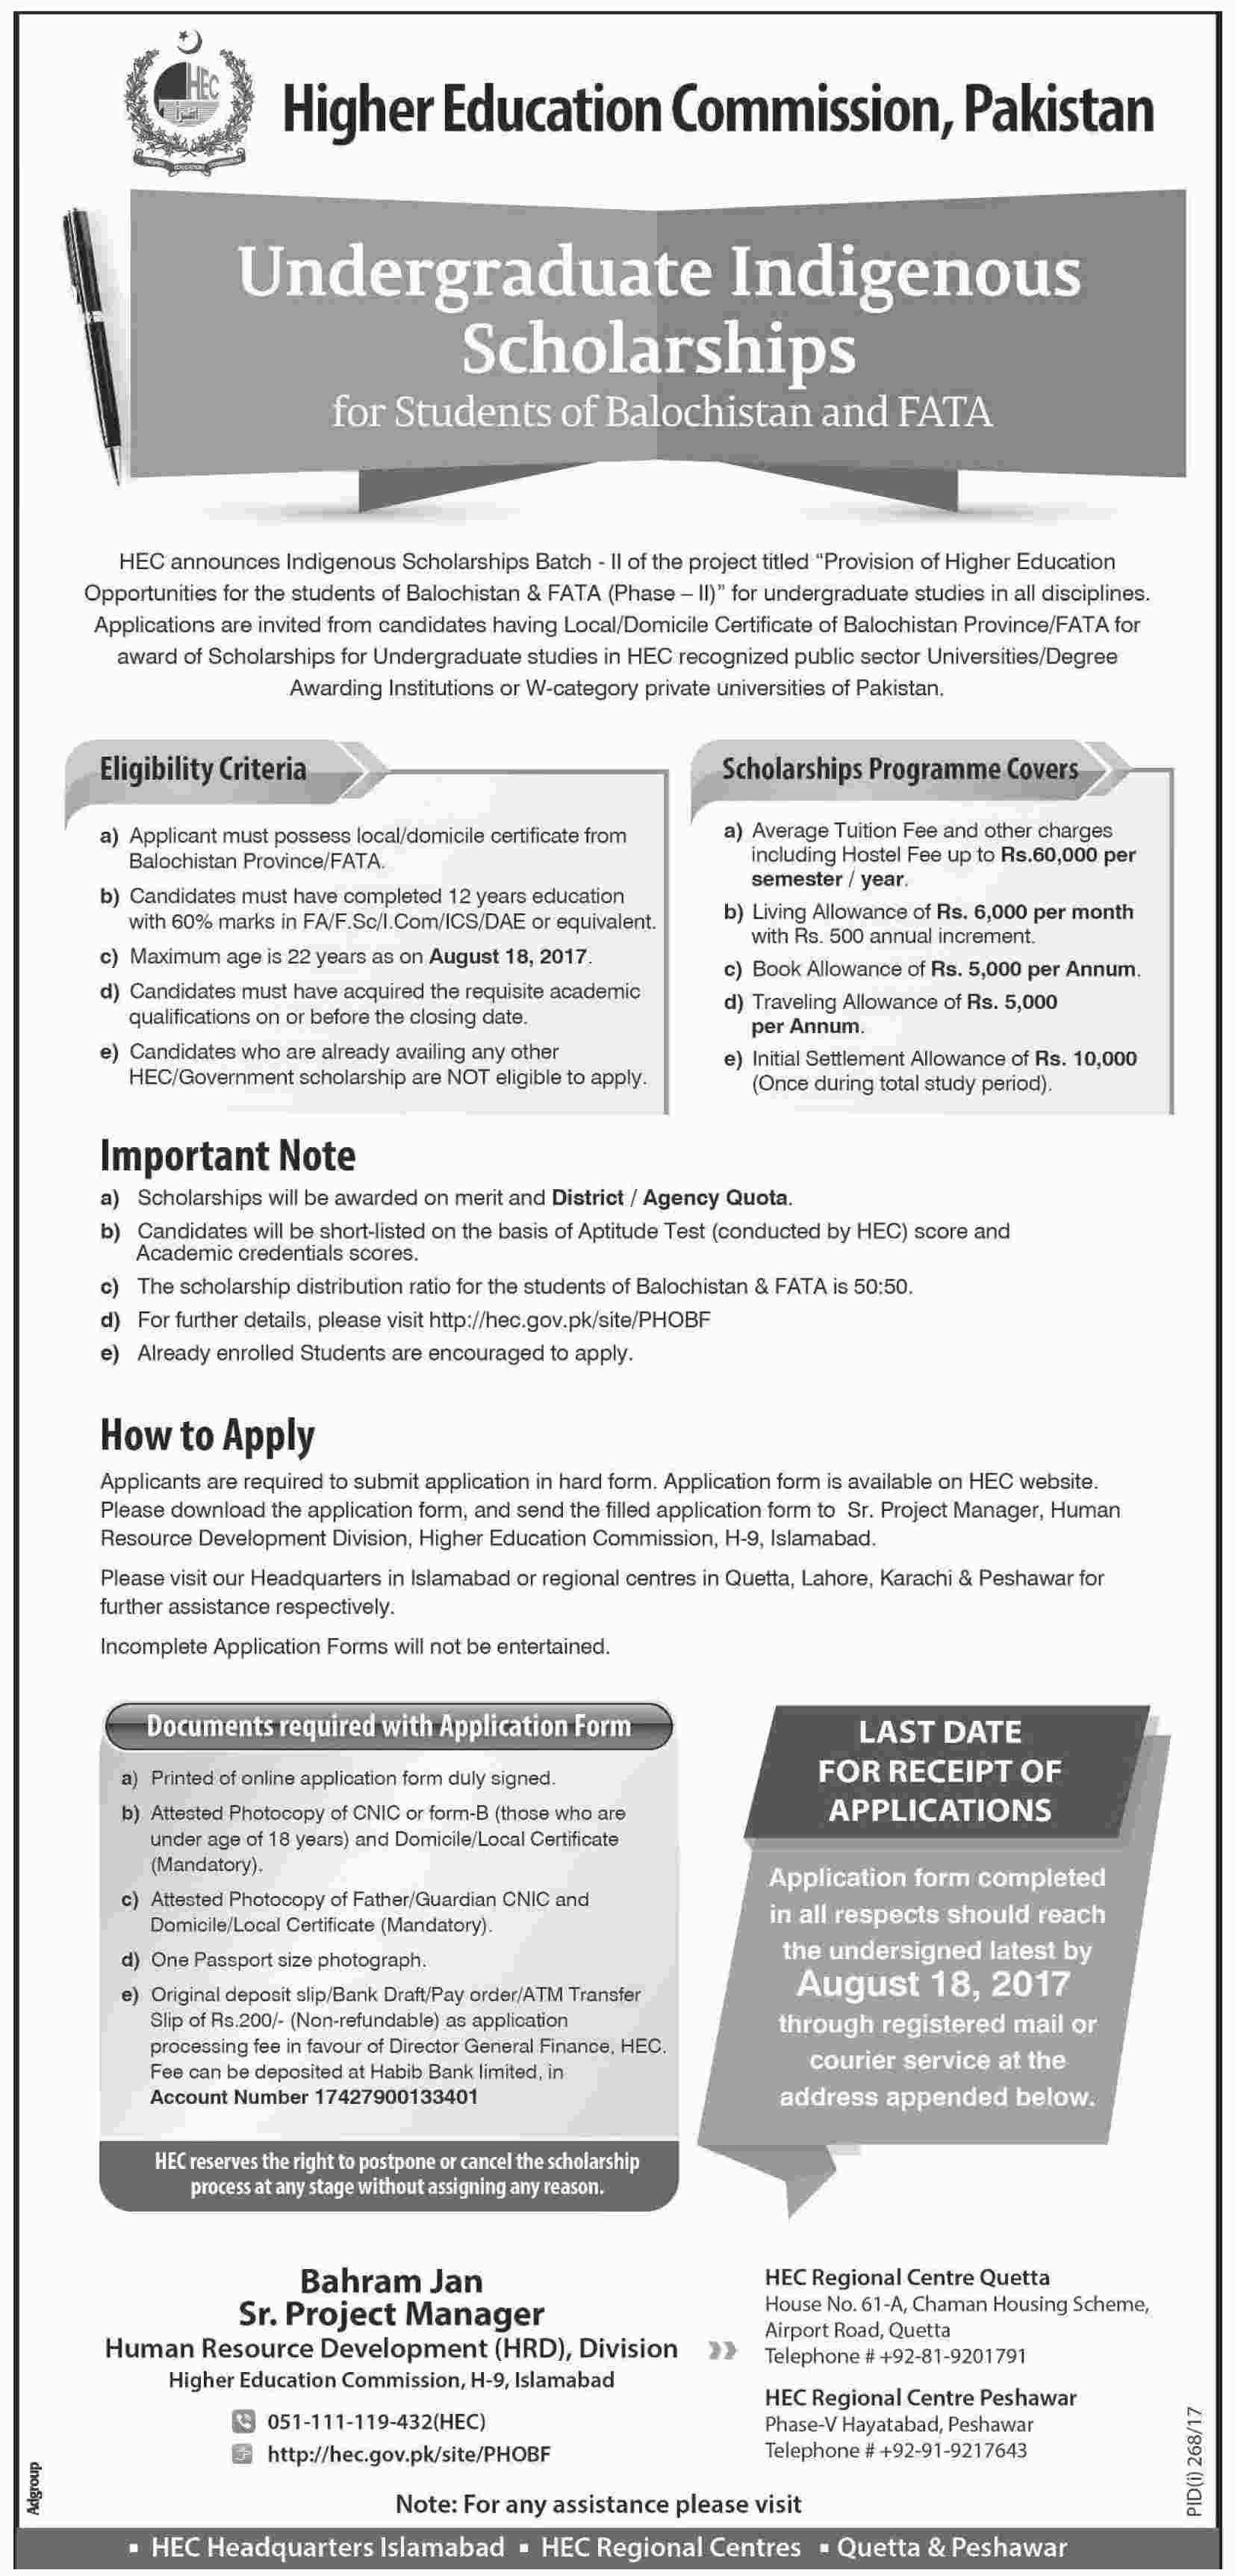 HEC Indigenous Scholarships for Students of Balochistan and FATA (Undergraduate Studies)